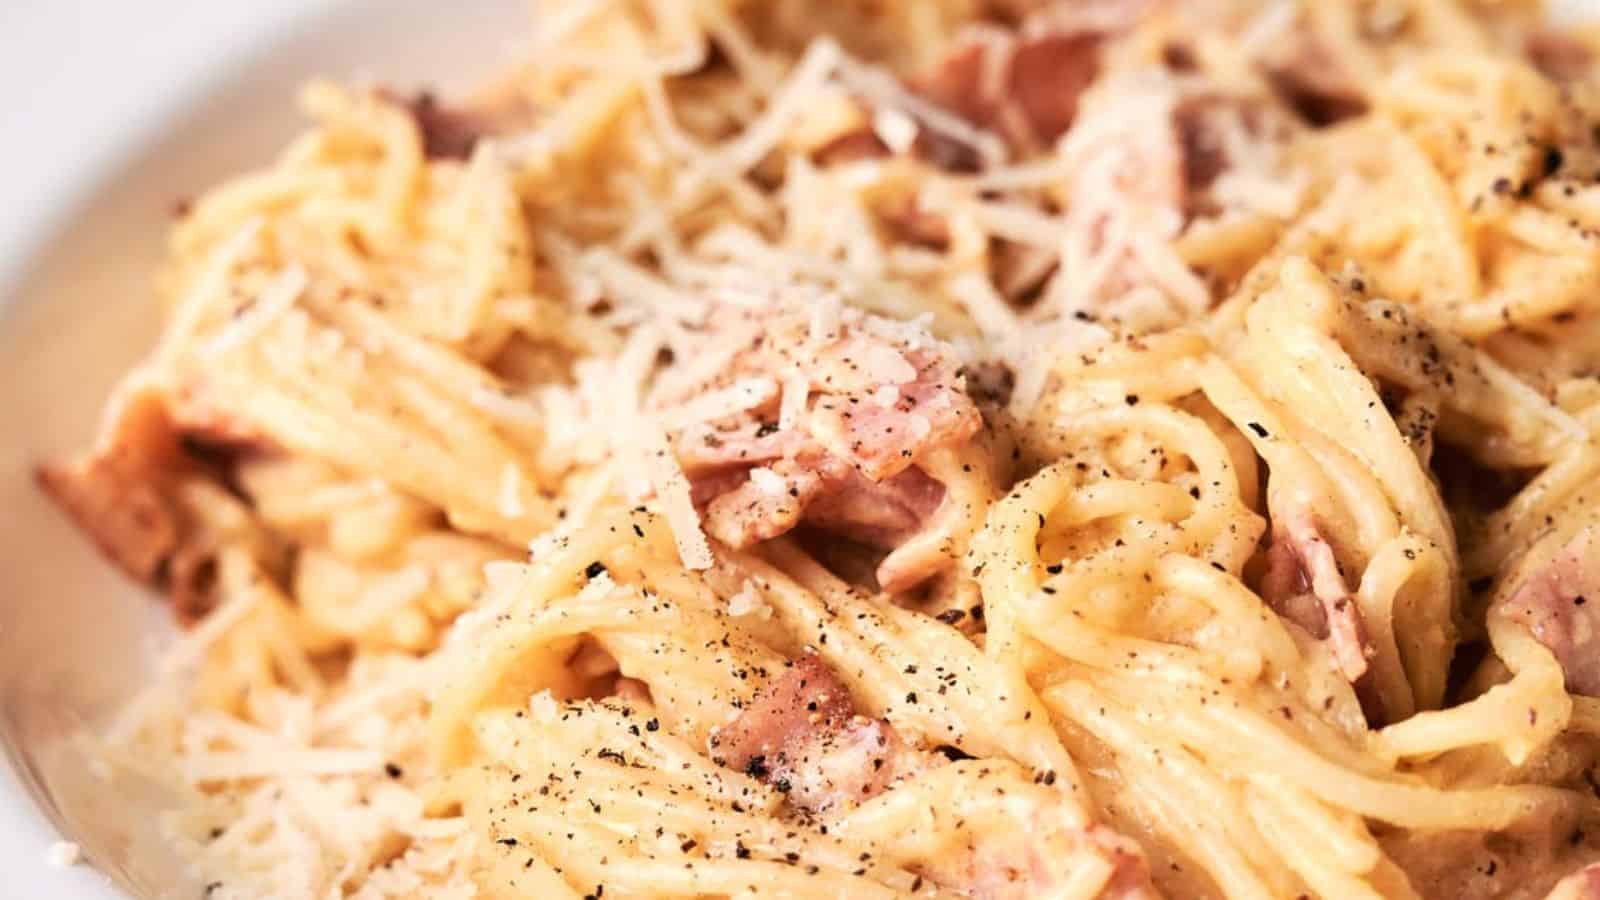 A close-up image of spaghetti carbonara topped with grated cheese and freshly ground black pepper.